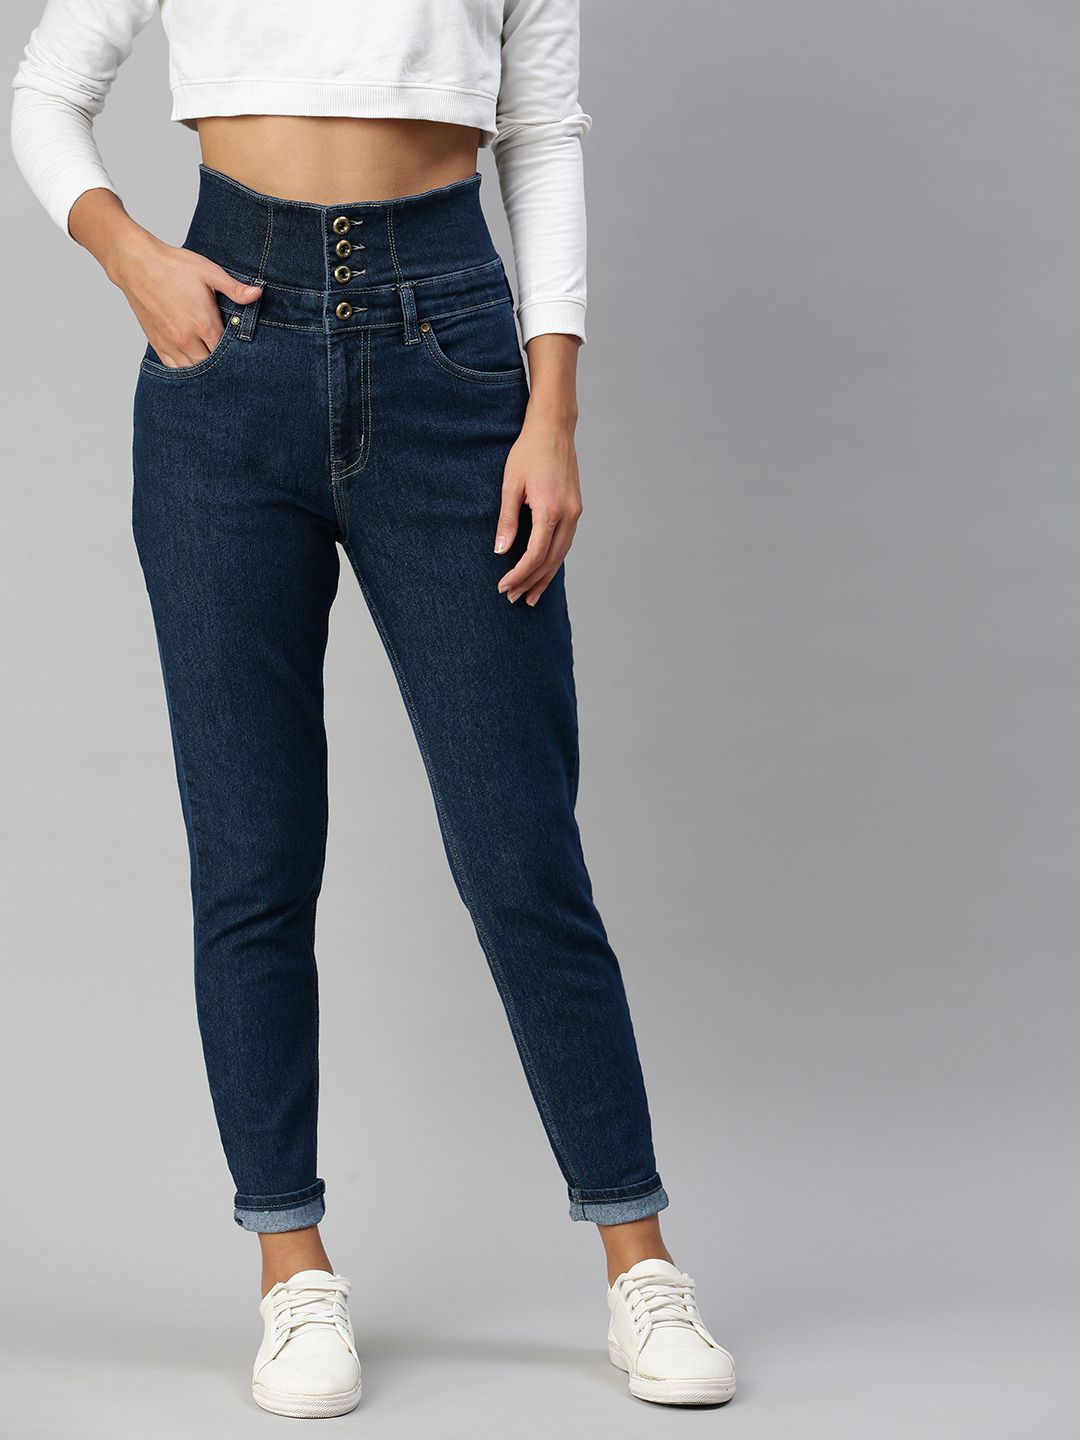 Roadster Women Blue Skinny Fit Stretchable Jeans Price in India